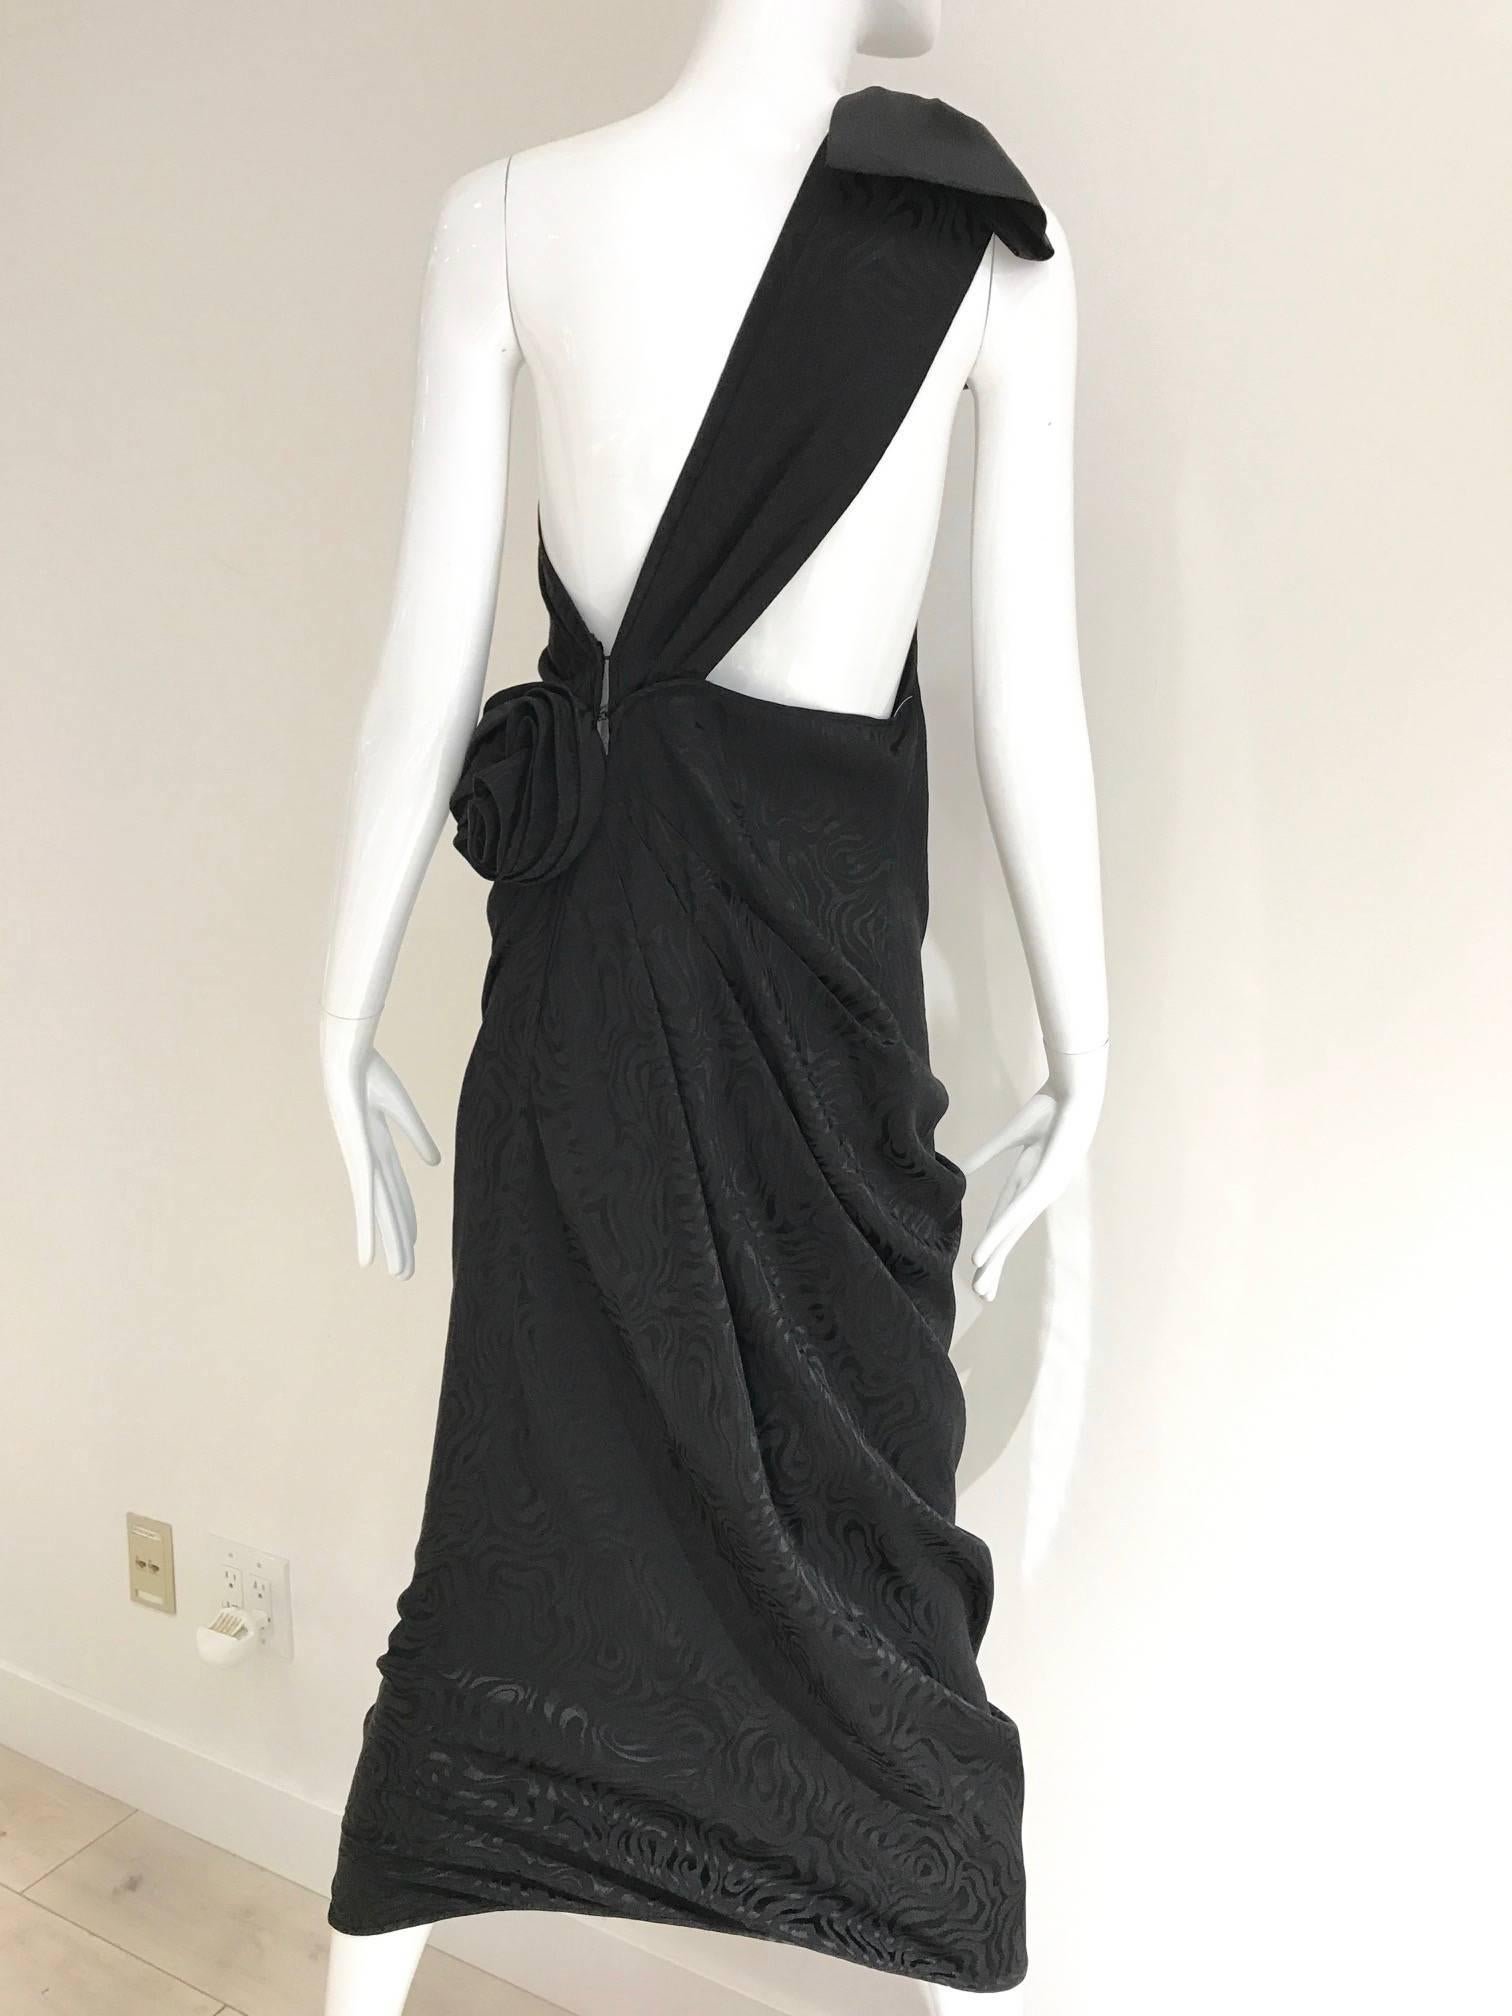 Chic vintage Ungaro black silk jacquard one shoulder cocktail dress with bow and exposed back.  Black tie party or cocktail dress
Fit size 4/  small to Medium. 
Bust: 34"/ Waist: 27"/ Hip: 35" 

*** This Garment has been